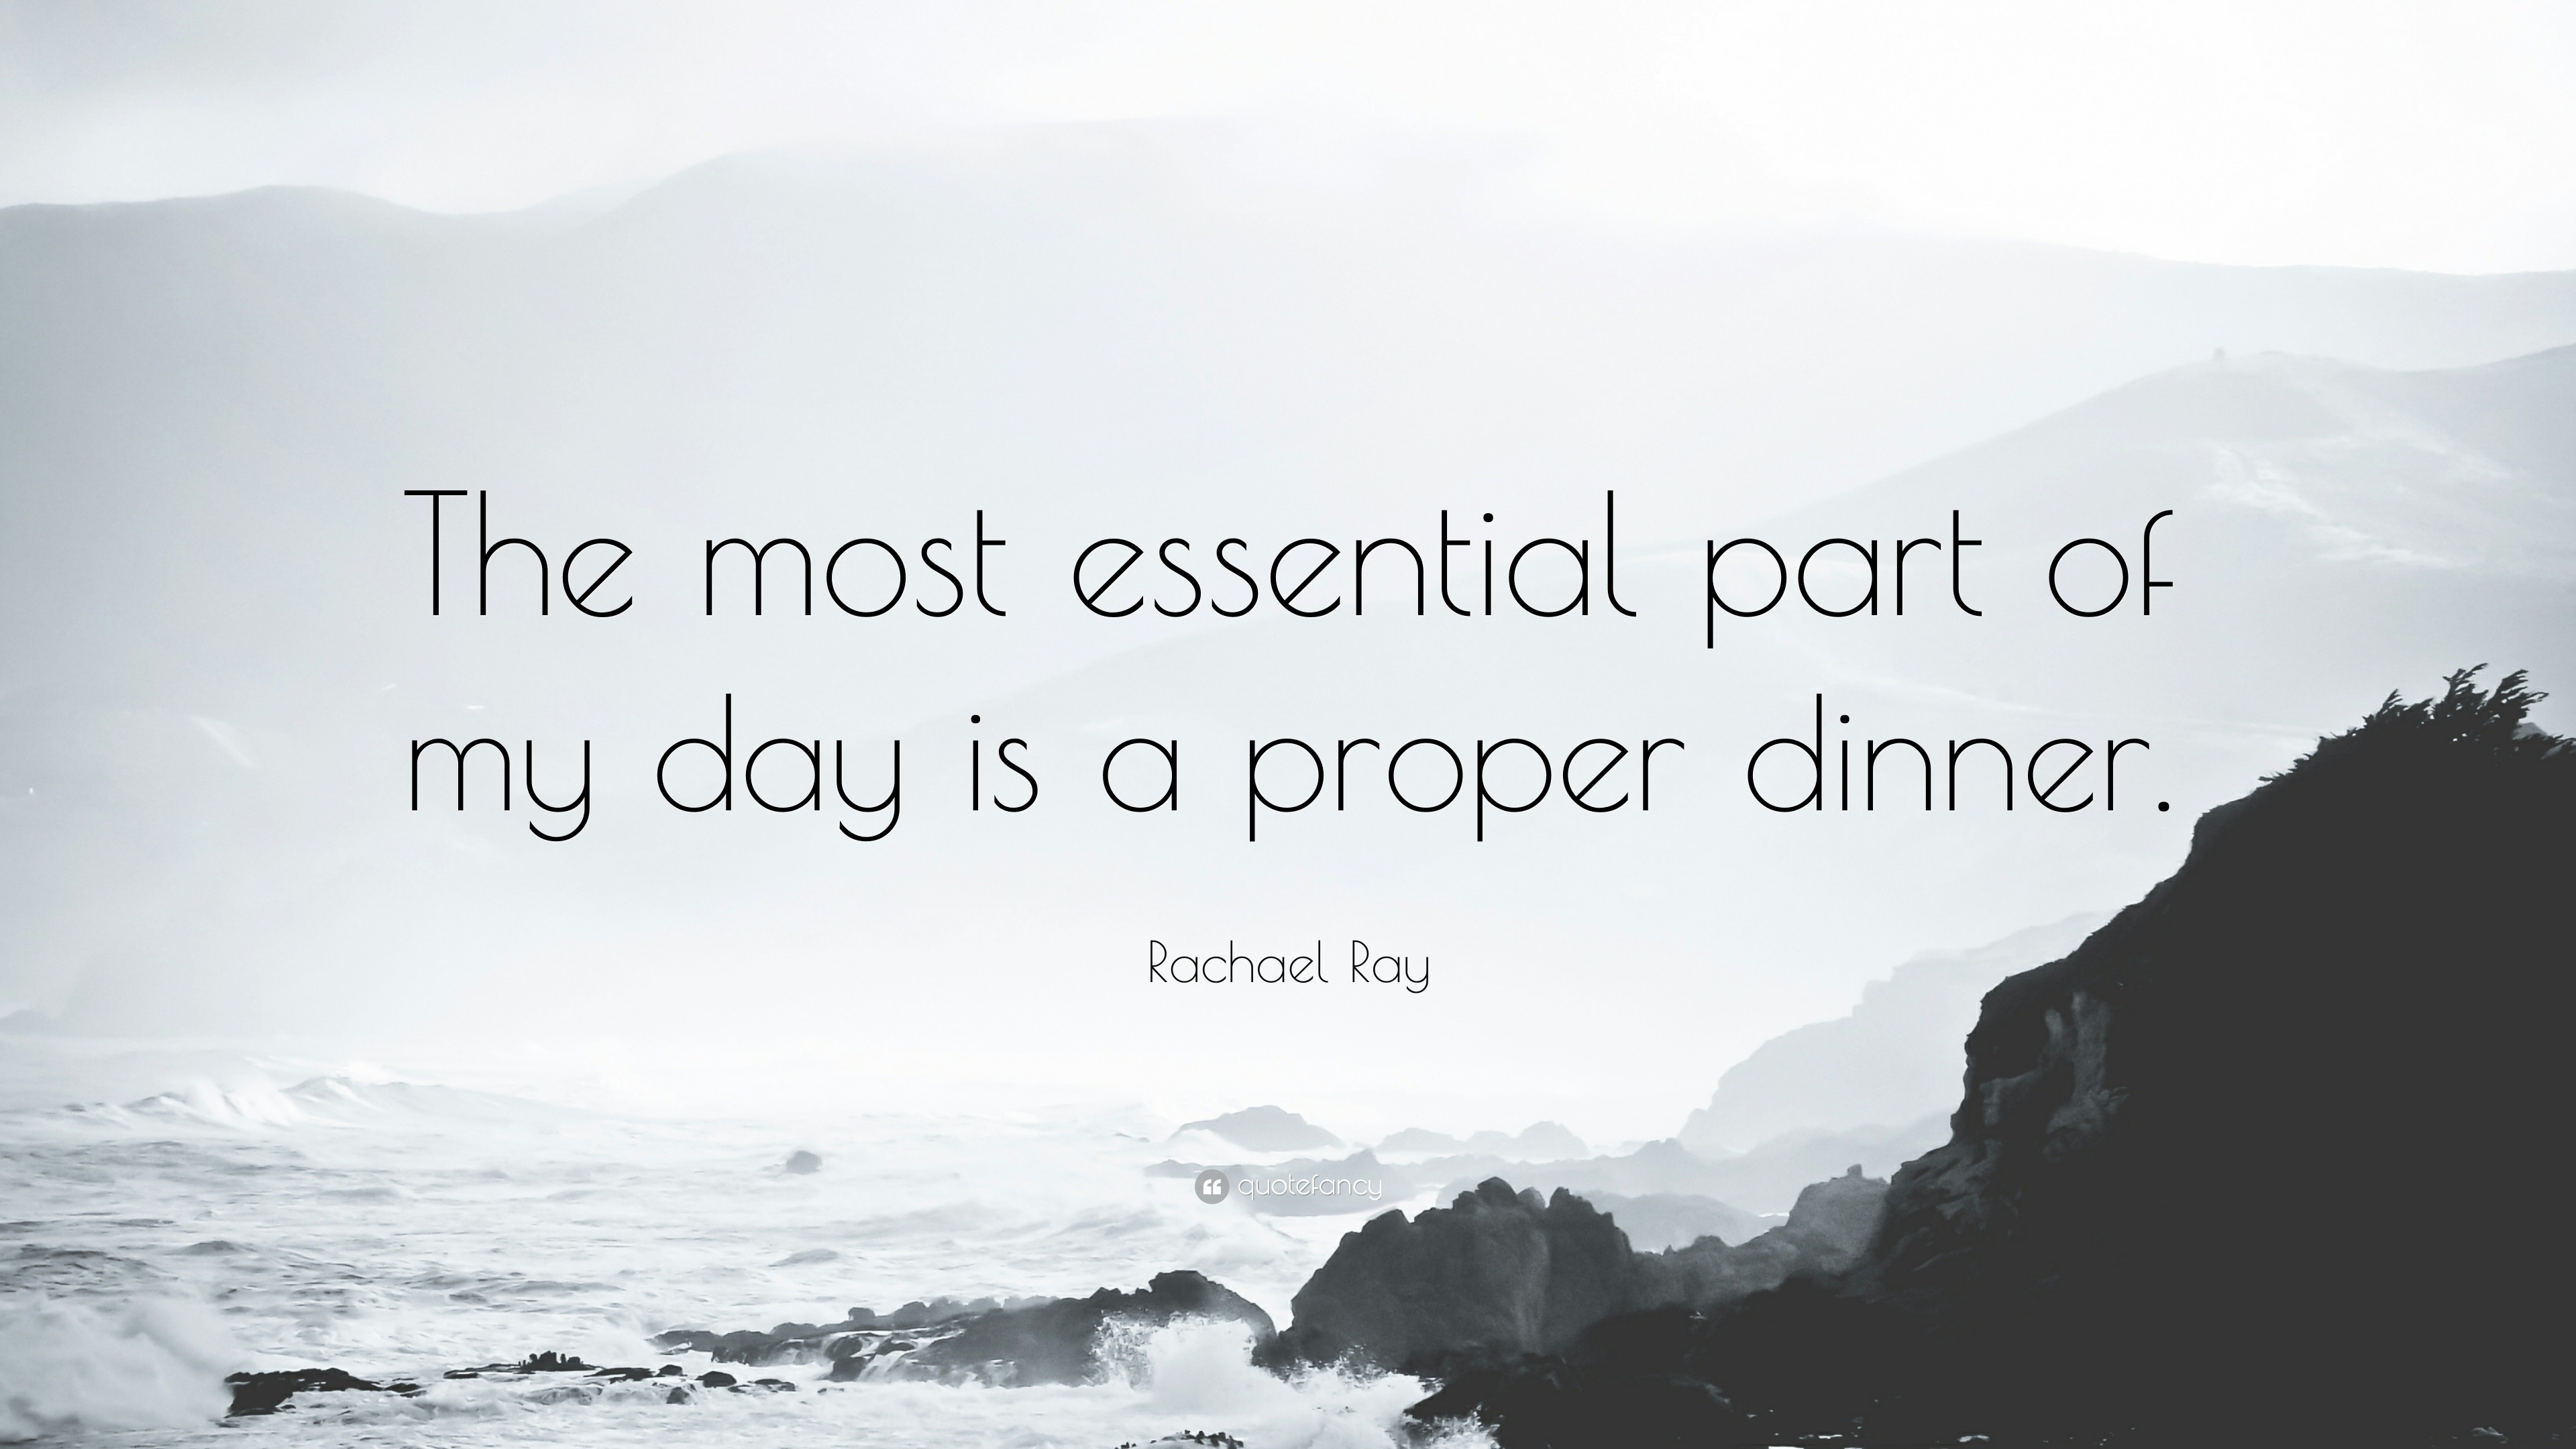 Rachael Ray Quote: “The most essential